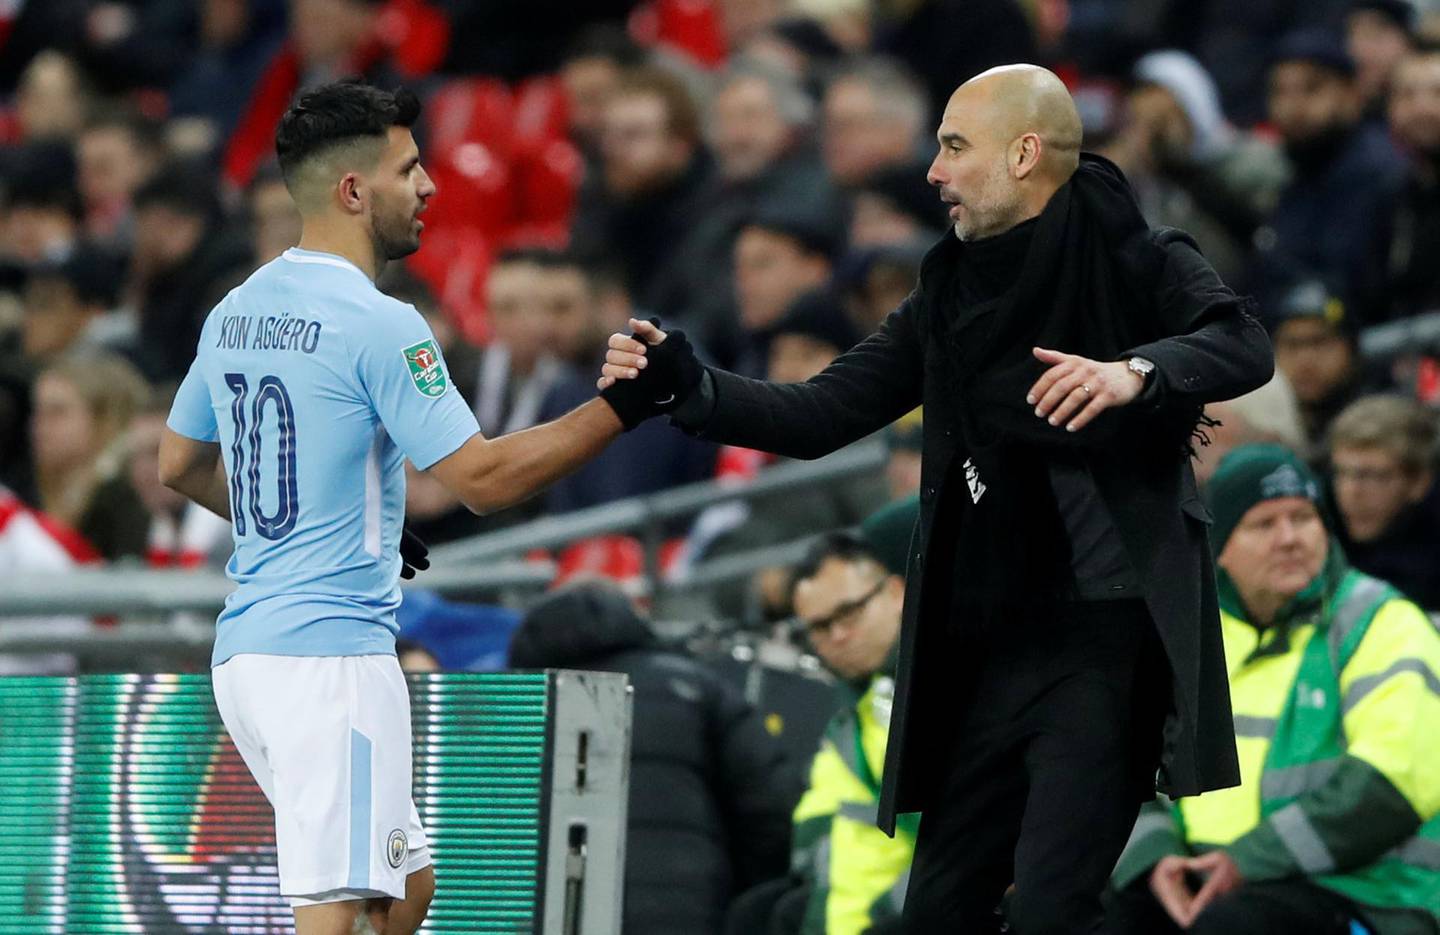 Soccer Football - Carabao Cup Final - Arsenal vs Manchester City - Wembley Stadium, London, Britain - February 25, 2018   Manchester City manager Pep Guardiola shakes hands with Sergio Aguero as he is substituted     Action Images via Reuters/Carl Recine     EDITORIAL USE ONLY. No use with unauthorized audio, video, data, fixture lists, club/league logos or "live" services. Online in-match use limited to 75 images, no video emulation. No use in betting, games or single club/league/player publications. Please contact your account representative for further details.